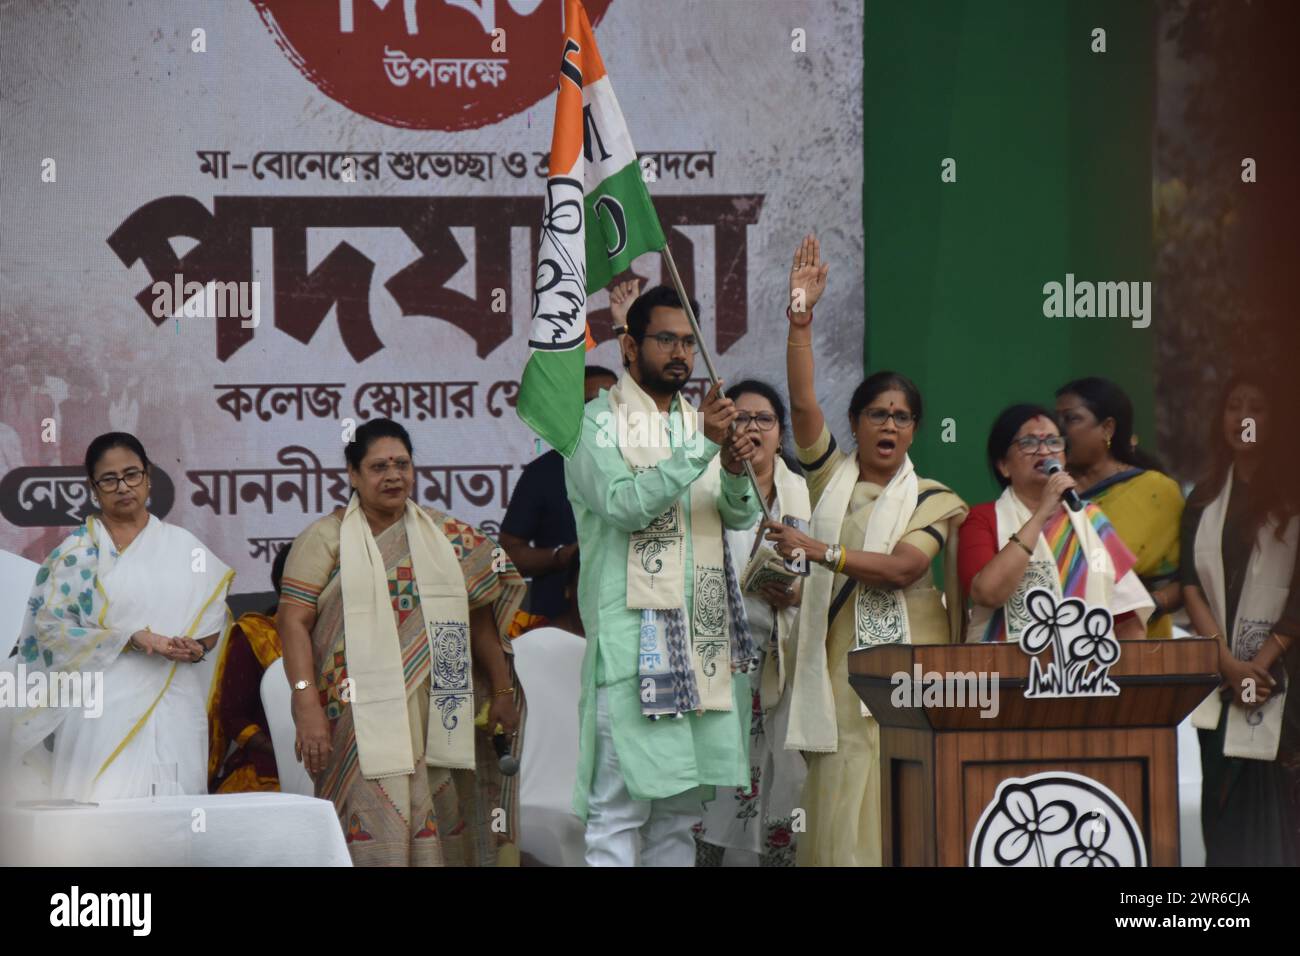 March 7, 2024, Kolkata, West Bengal, India: A BJP MLA changing his party to TMC by taking the TMV flag at the West Bengal Chief Minister and Trinamool Supremo Mamata Banerjee led a women's rally in Kolkata today, responding to Prime Minister Narendra Modi's criticism of the Trinamool Congress over the Sandeshkhali issue. Women from Sandeshkhali island, where allegations against local Trinamool leaders have emerged, also joined. The rally, themed ''Mahilader Adhikar, Amader Angikar'' (women's rights, our commitment), featured Banerjee leading a foot march, accompanied by prominent Trinamool lea Stock Photo